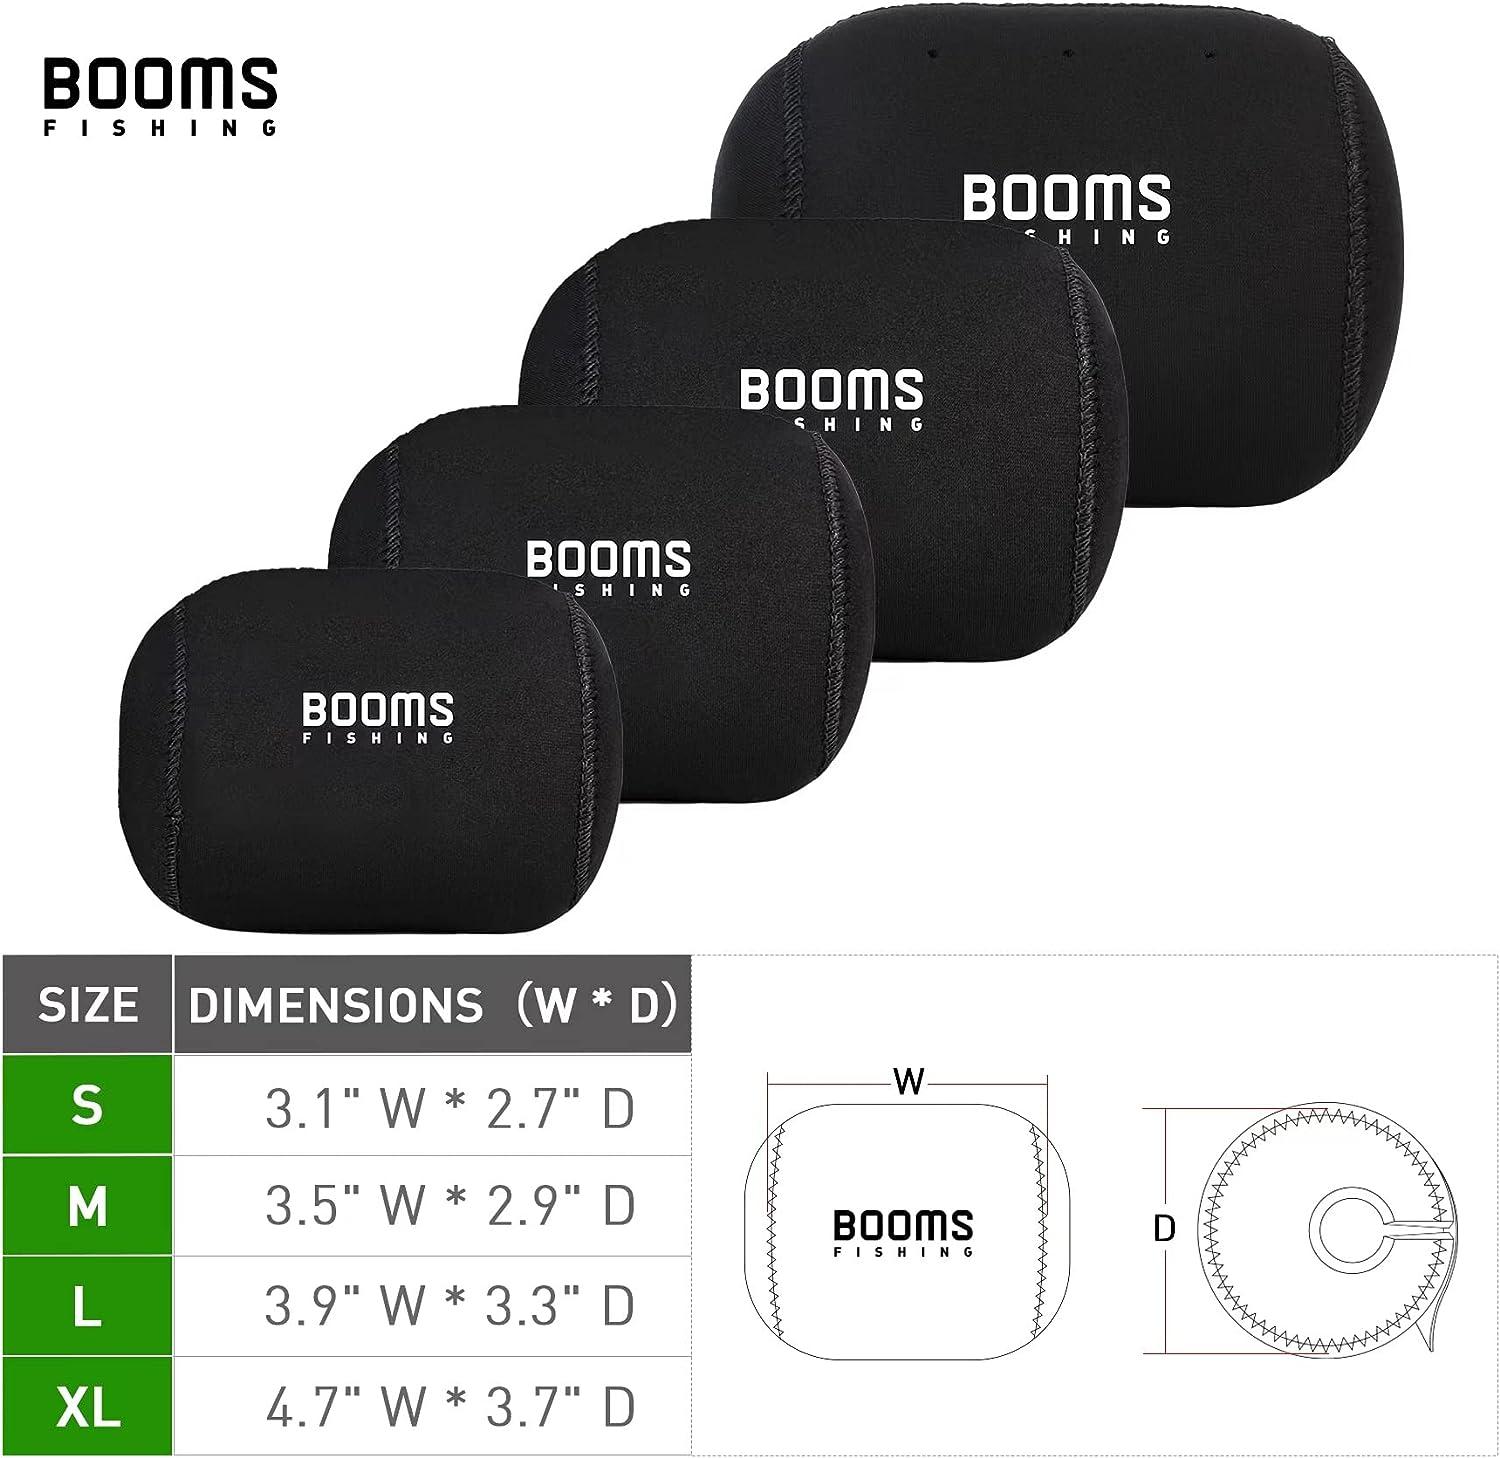 Booms Fishing RC1 Neoprene Reel Cover, Round Baitcasting Reels Cover, Fit  for 50 100 200 300 400 800 1000 2000 3000 400010000 Conventional Reels,  S/M/L/XL Size XL (4.7 W x 3.7 D)